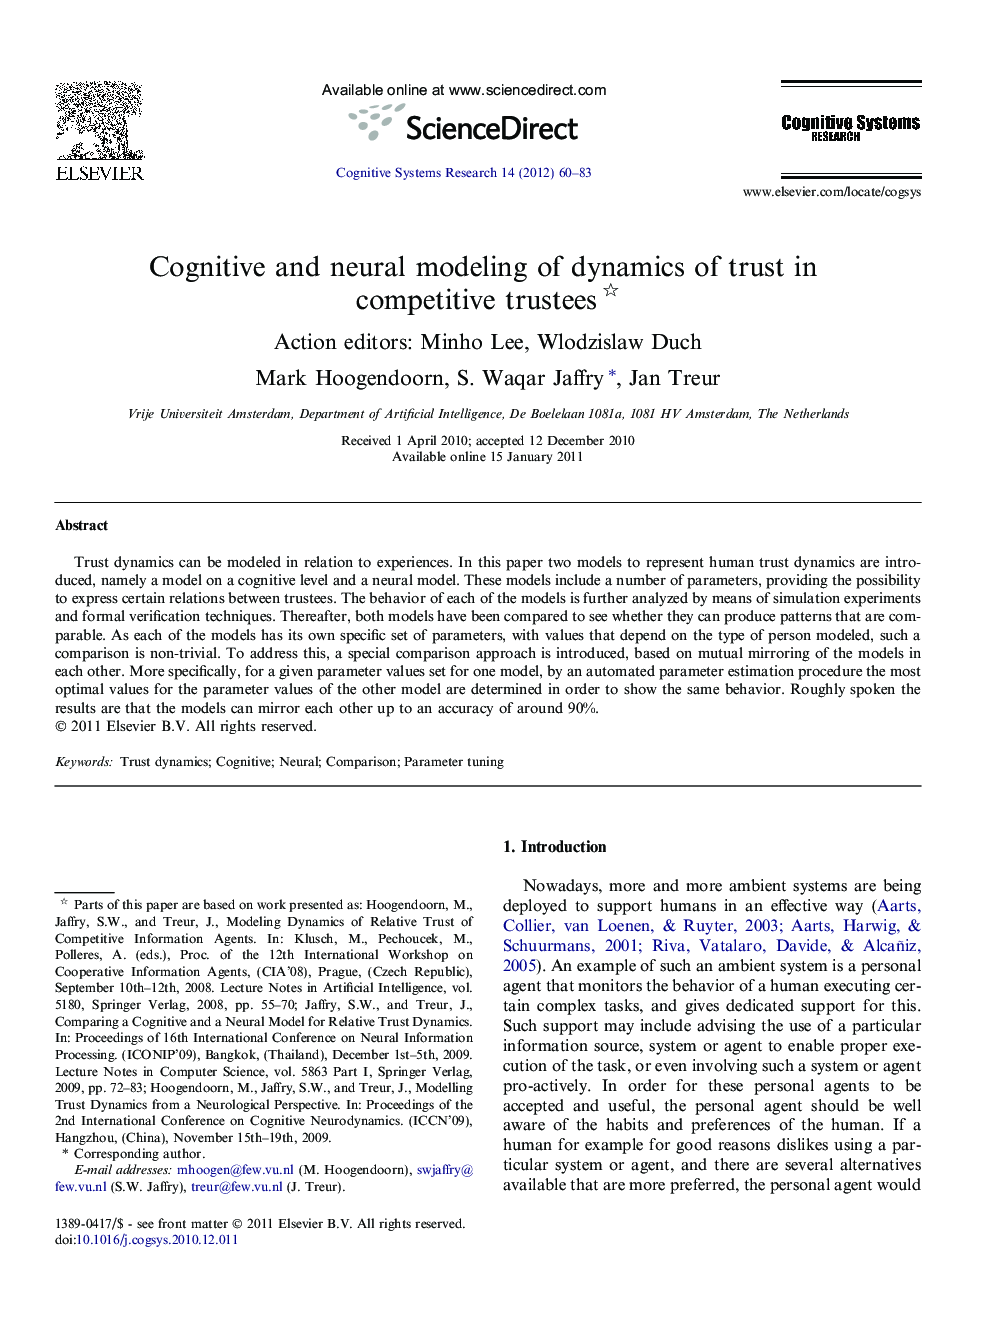 Cognitive and neural modeling of dynamics of trust in competitive trustees 